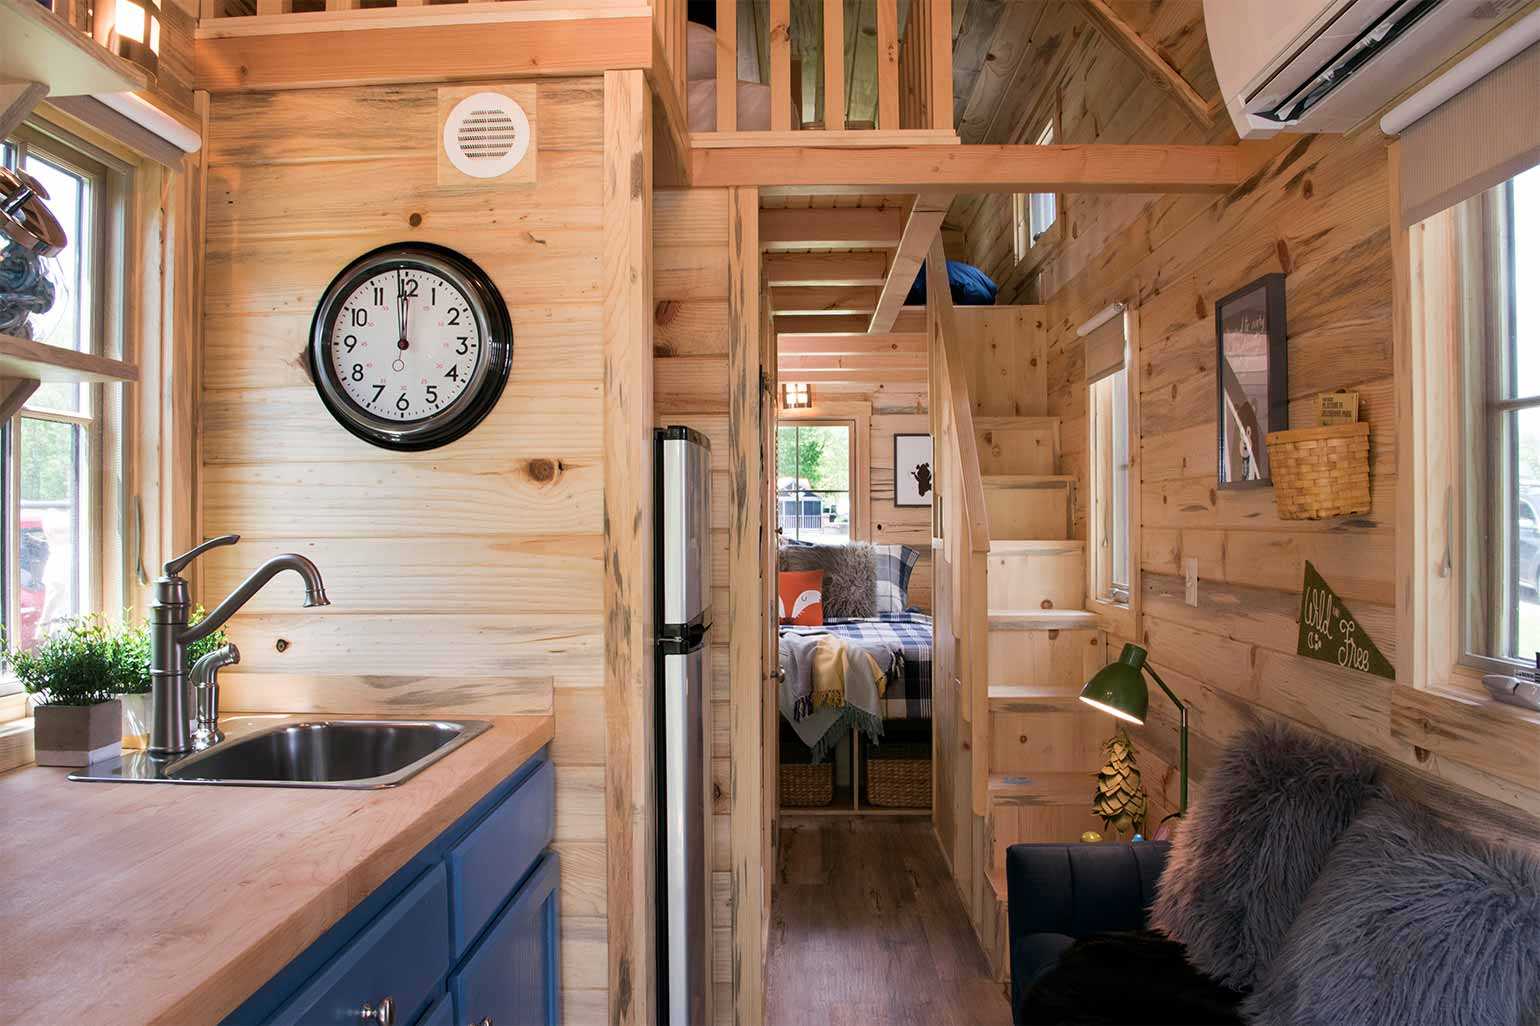 Tiny House for Sale - The WILLOW 2/1 with loft Tiny Home